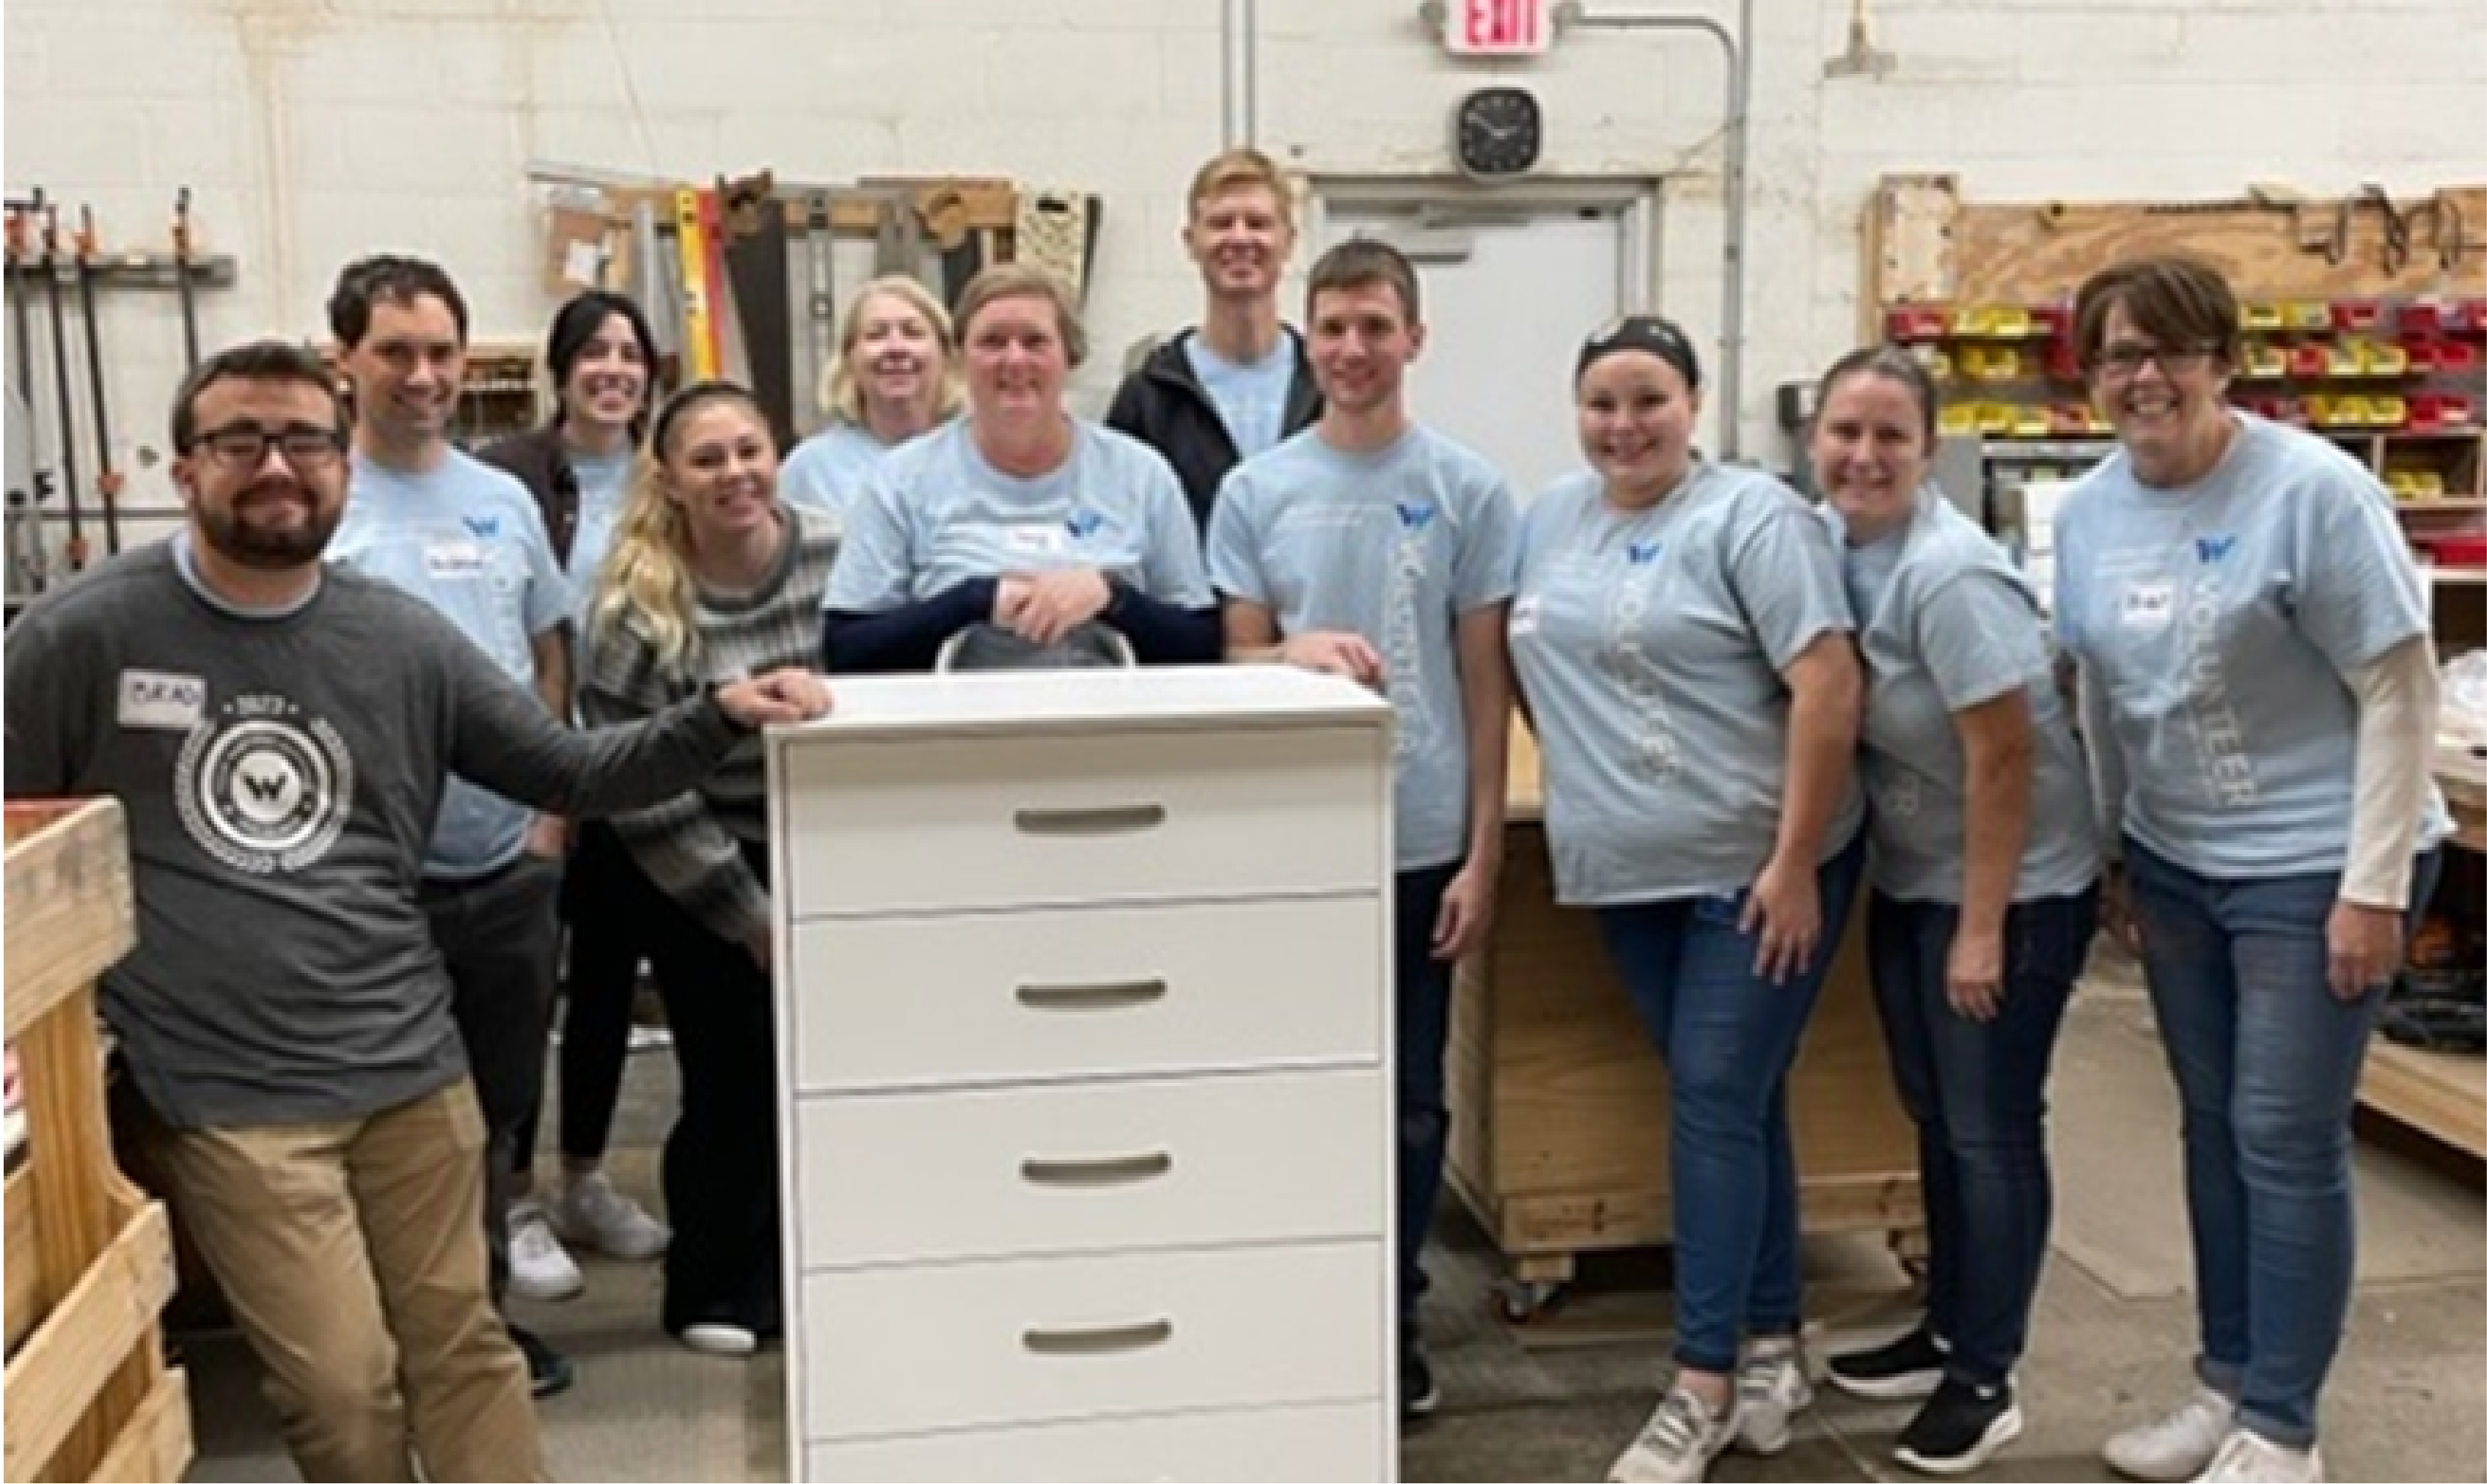 Western National employees smiling for the camera behind a dresser they helped assemble for Bridging.